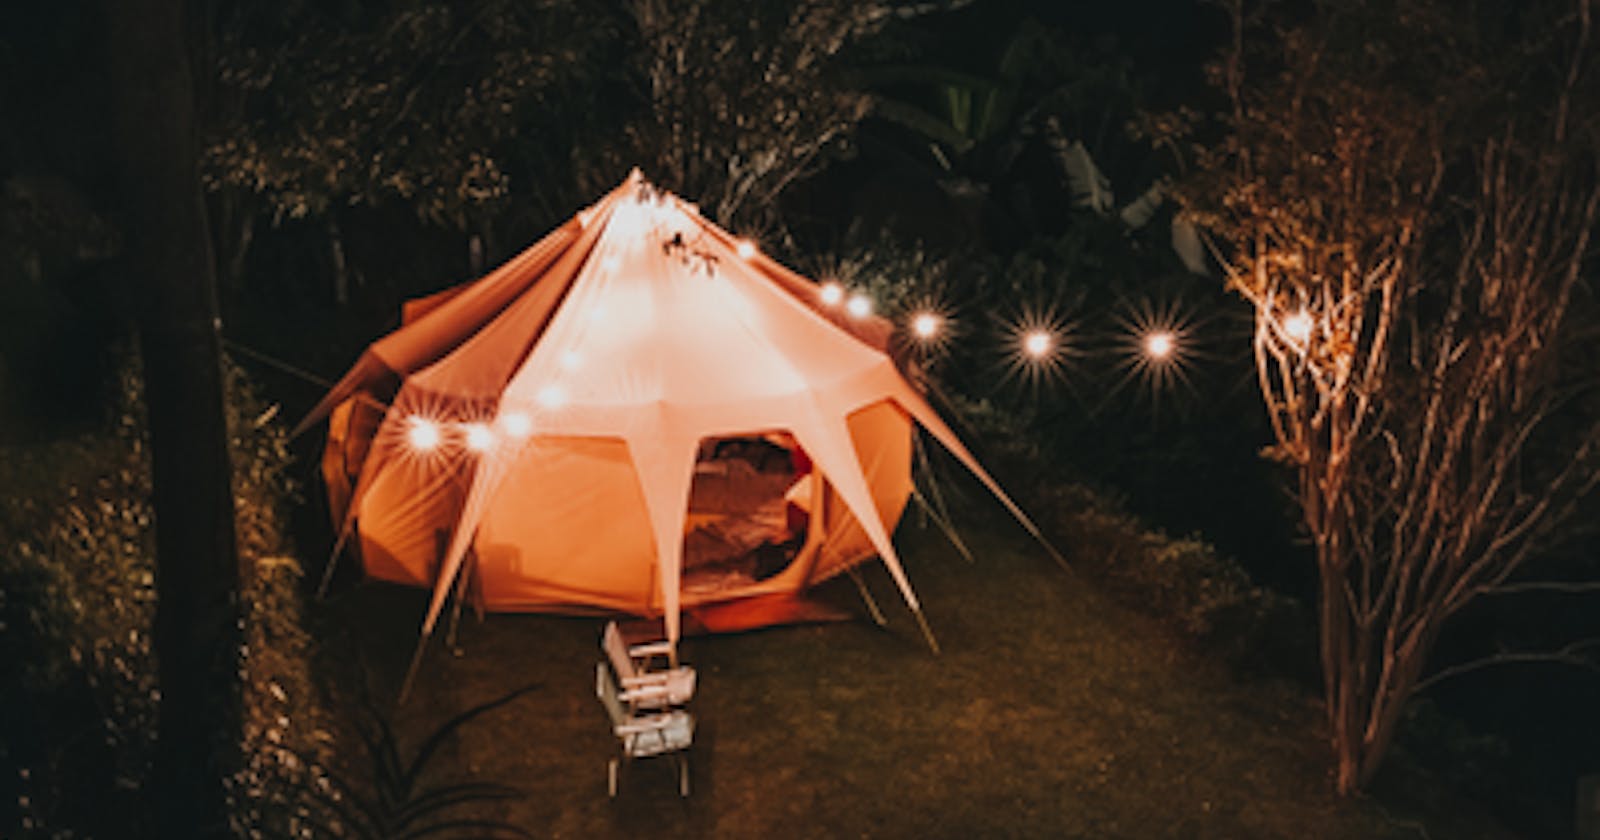 Experience Luxury, Comfort and Adventure through Glamping in Tenby Wales